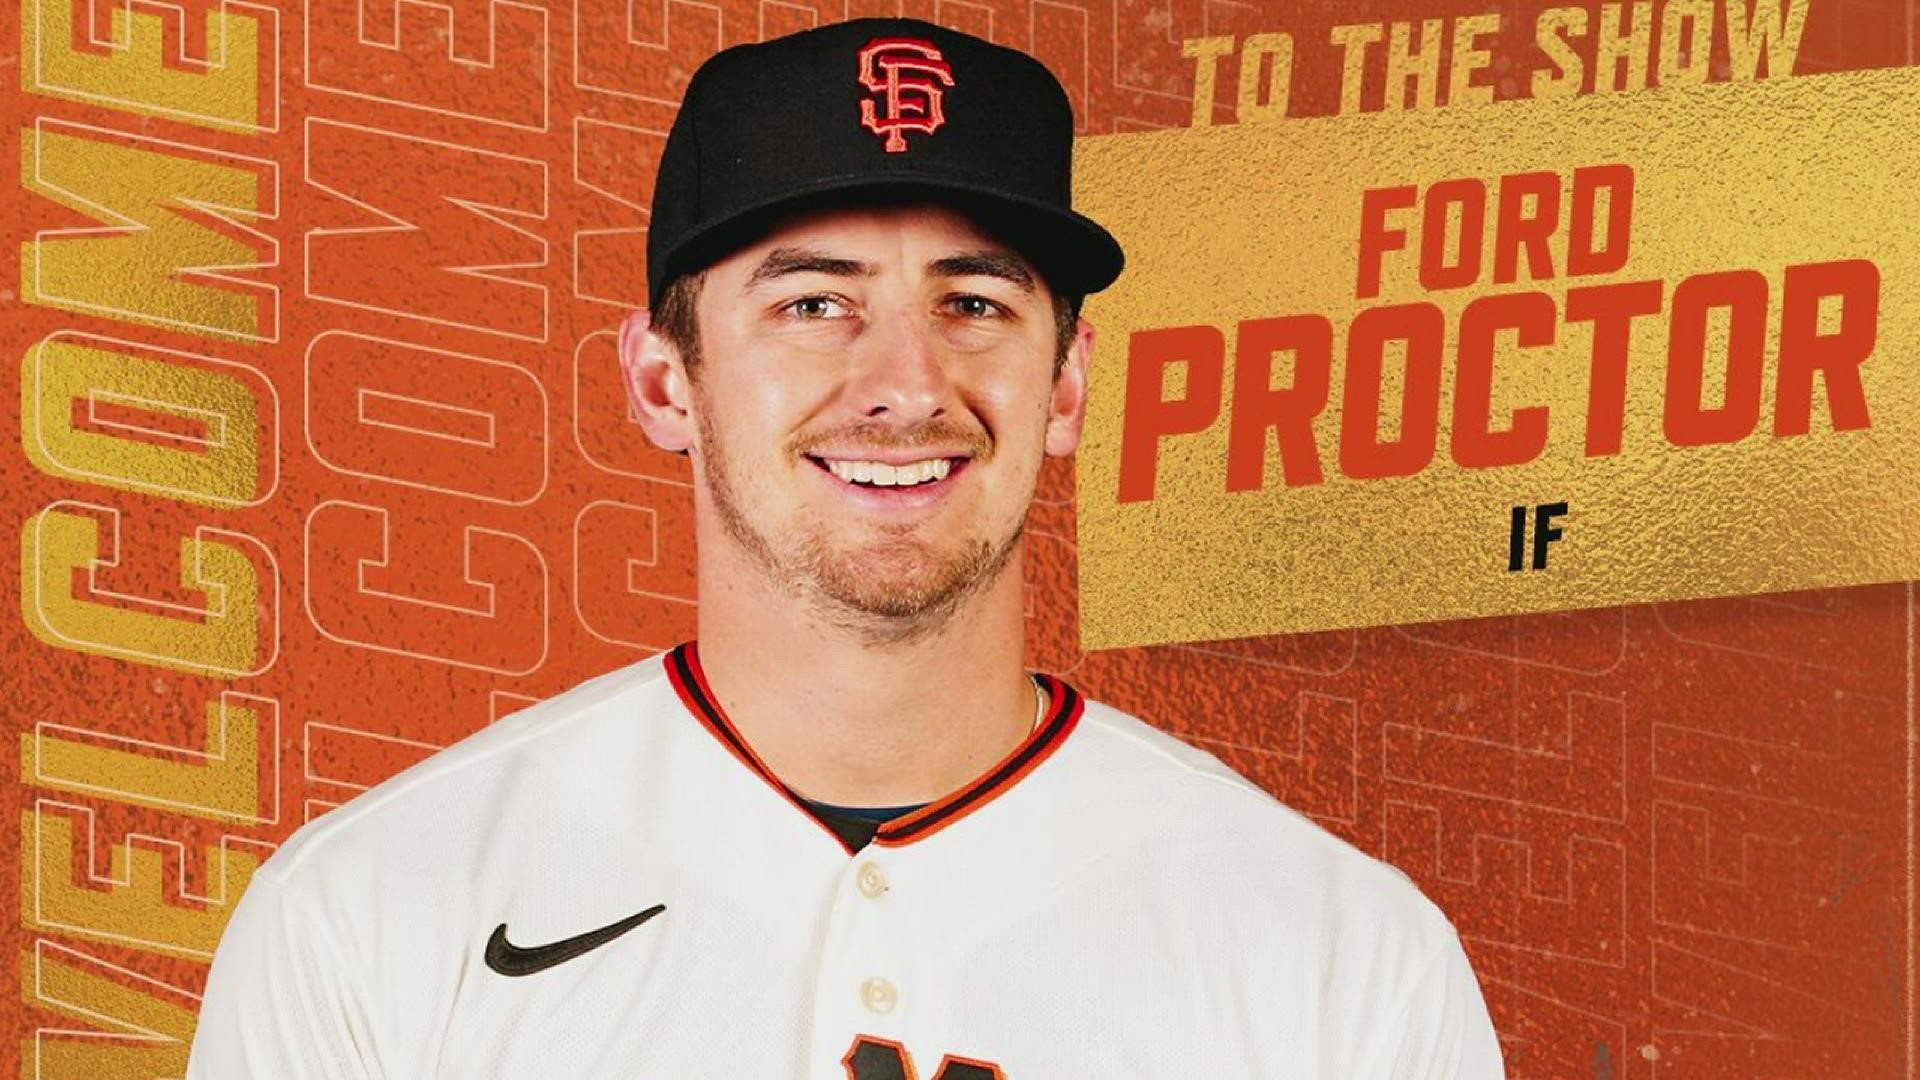 Kelly graduate Ford Proctor has earned a call to the show with San Francisco